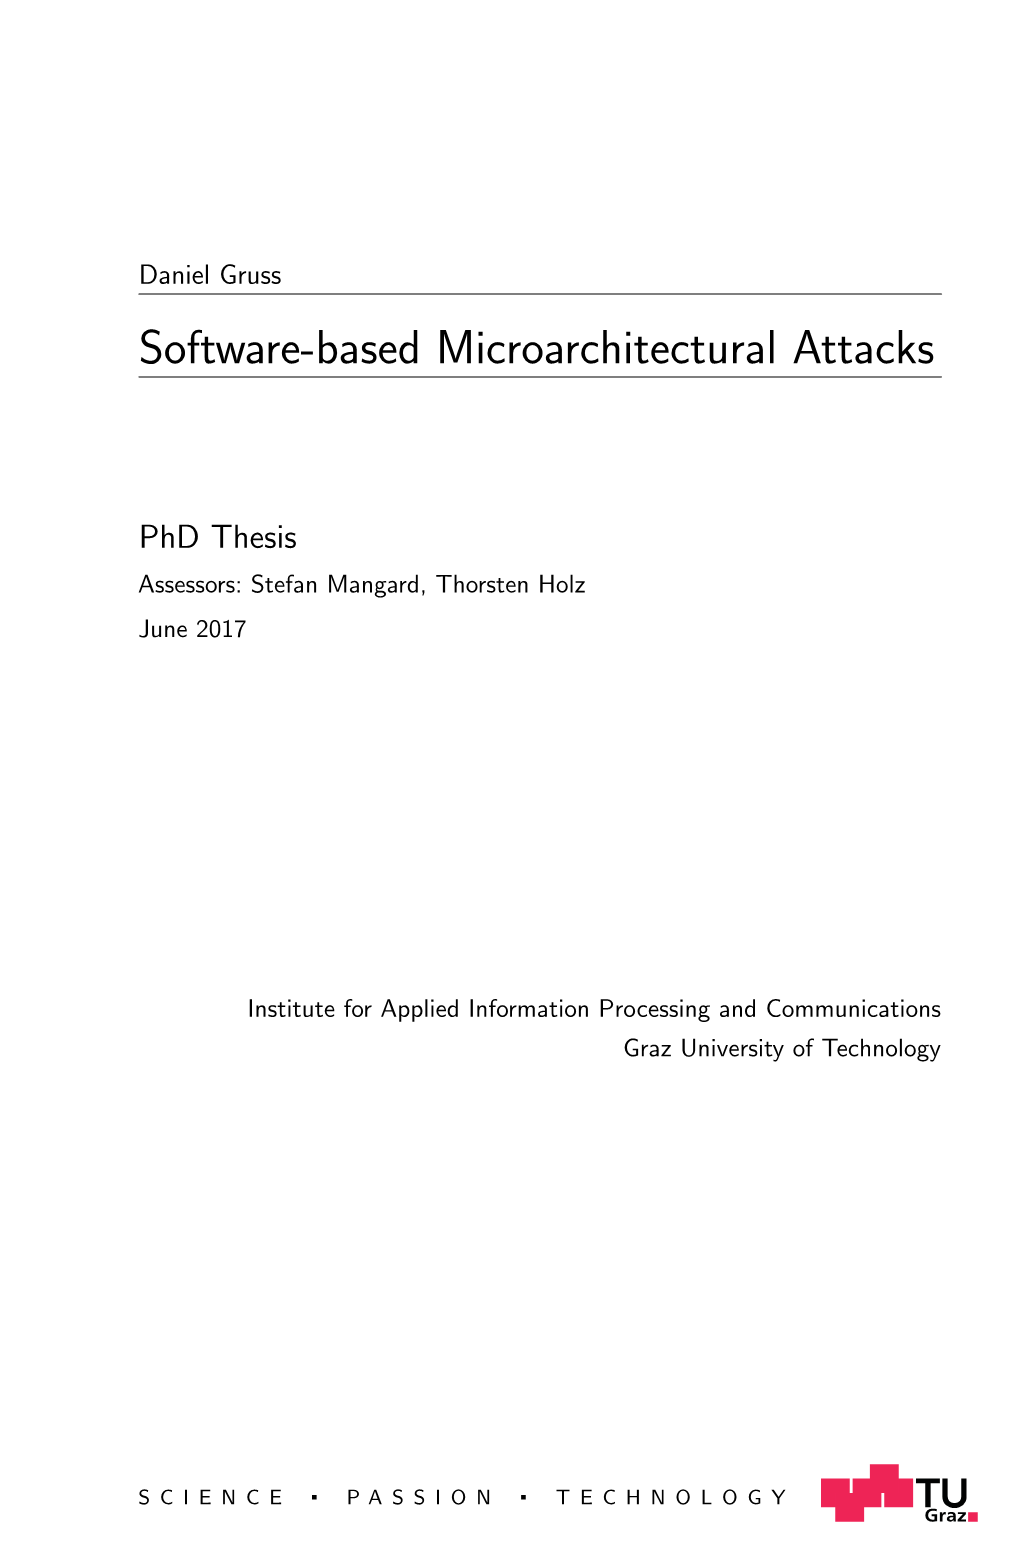 Software-Based Microarchitectural Attacks